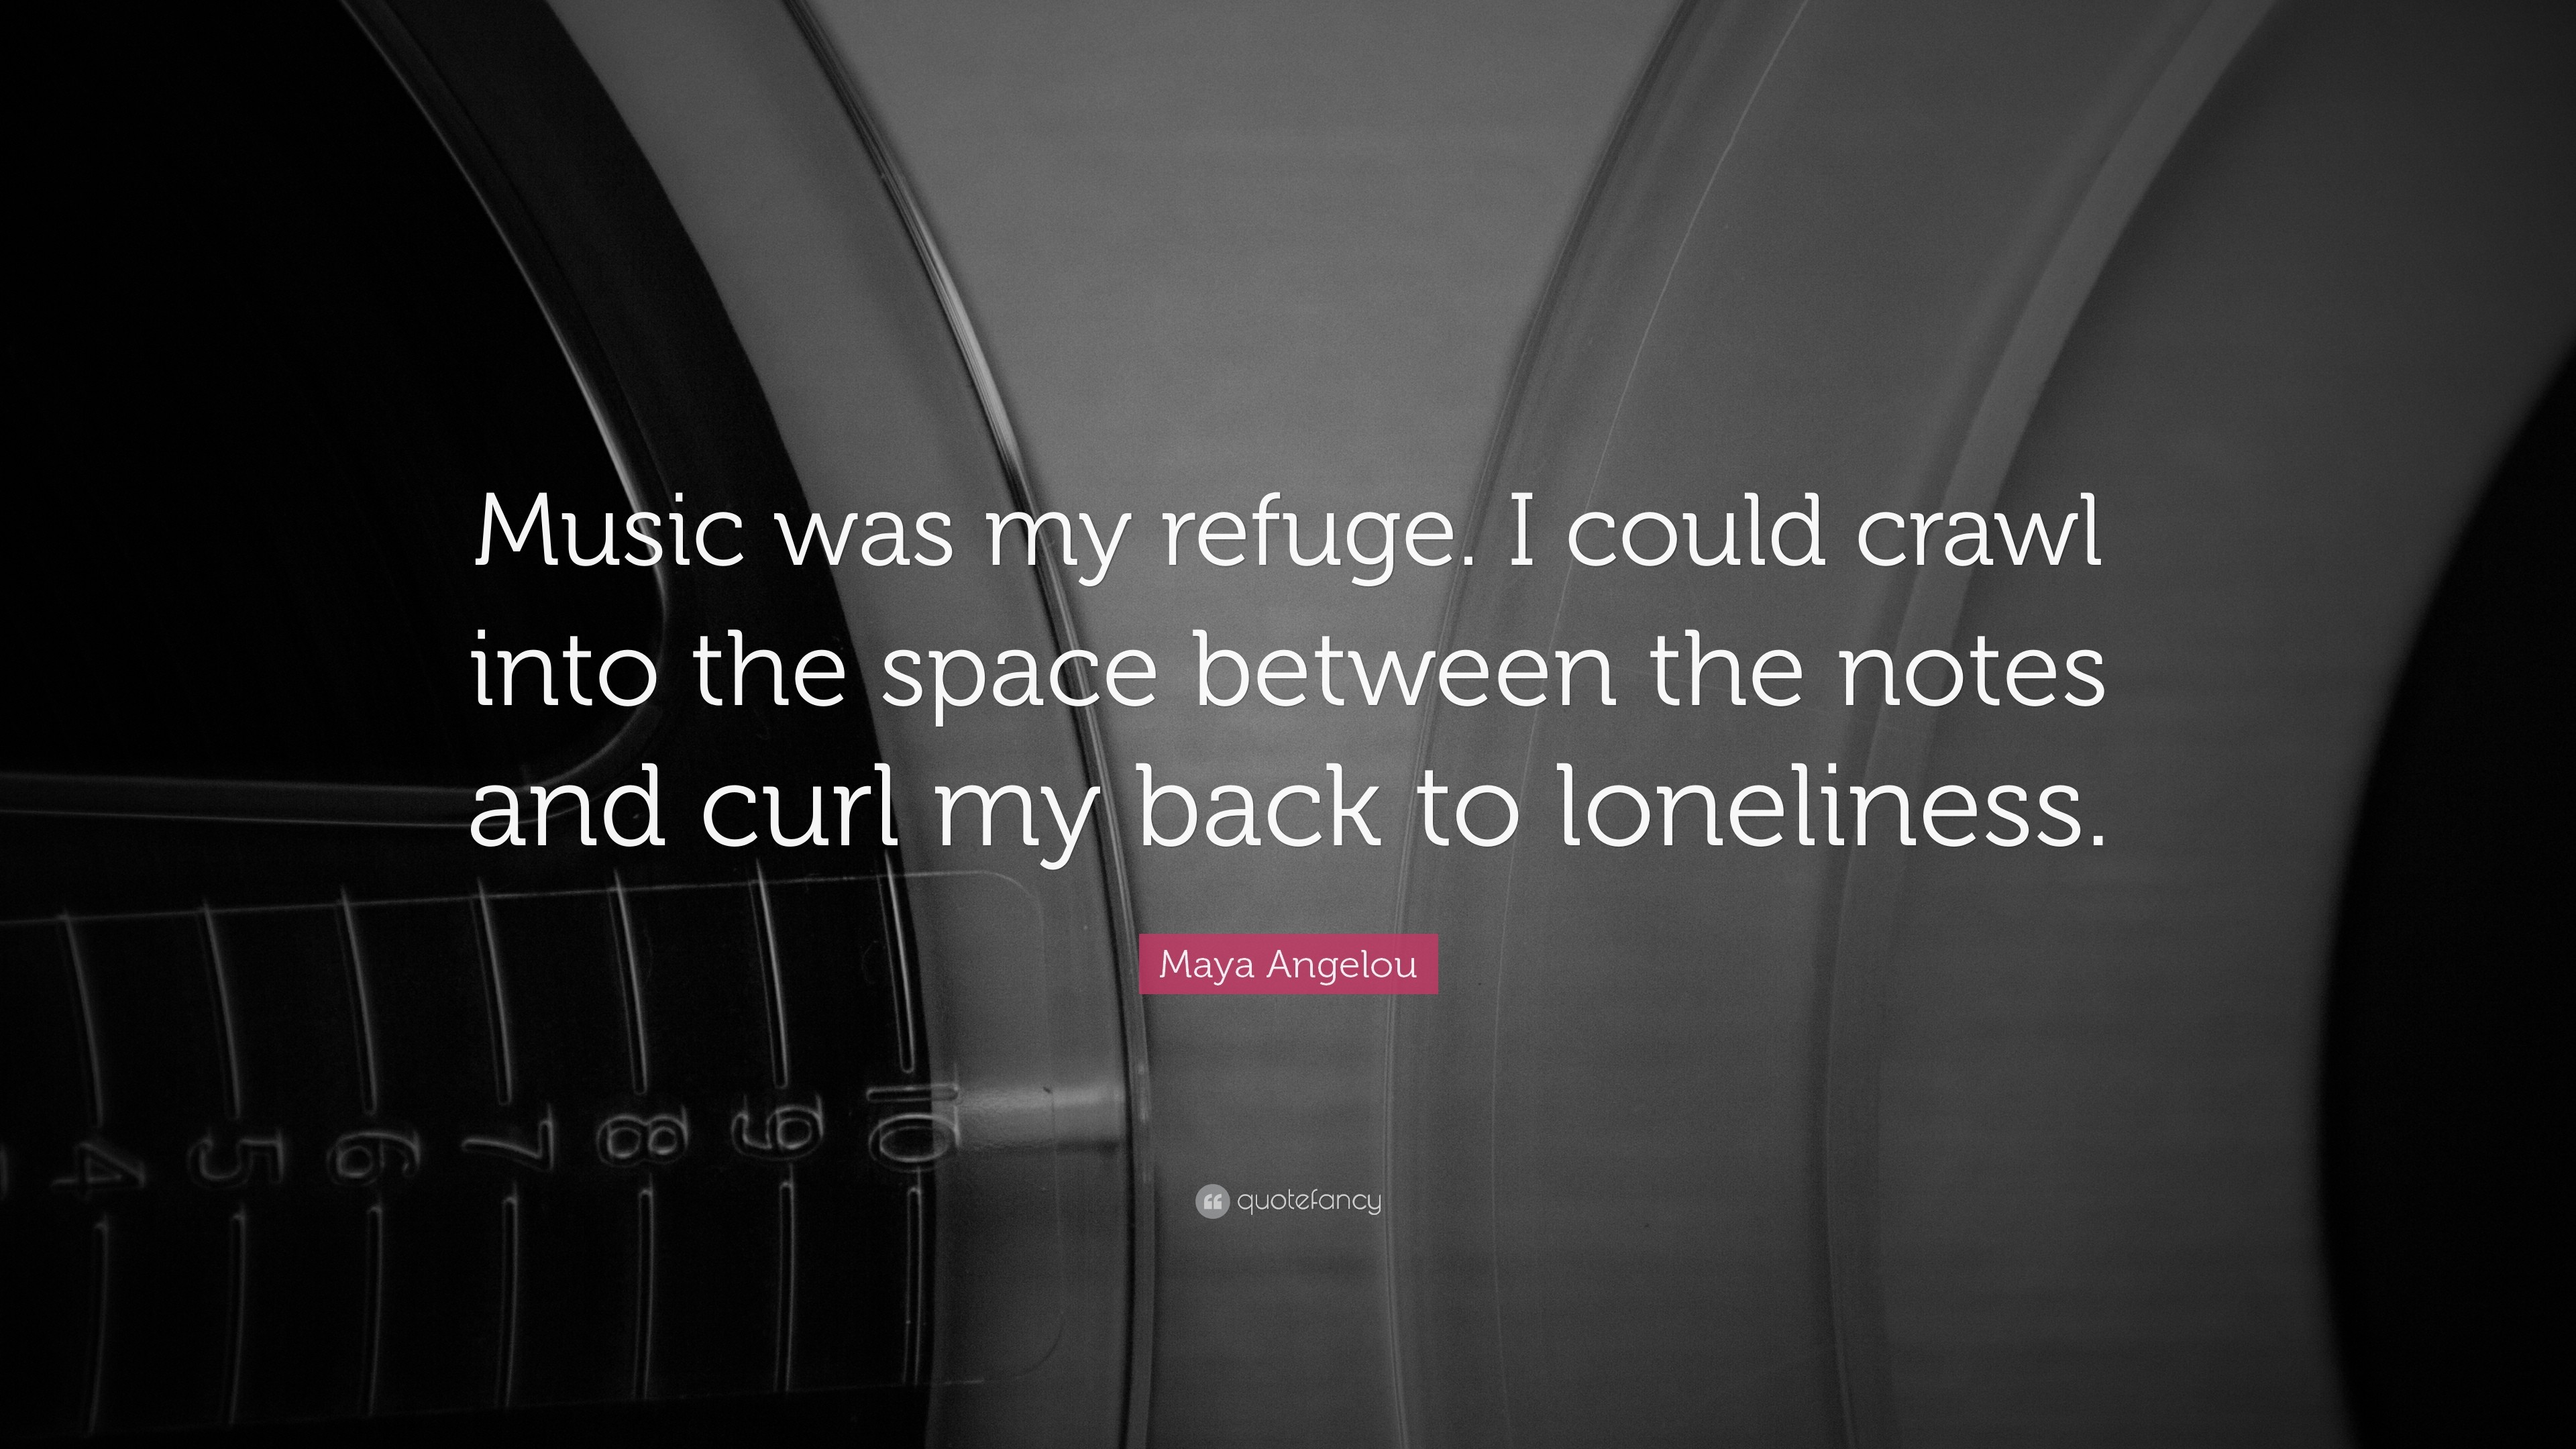 3840x2160 Music Quotes: “Music was my refuge. I could crawl into the space between